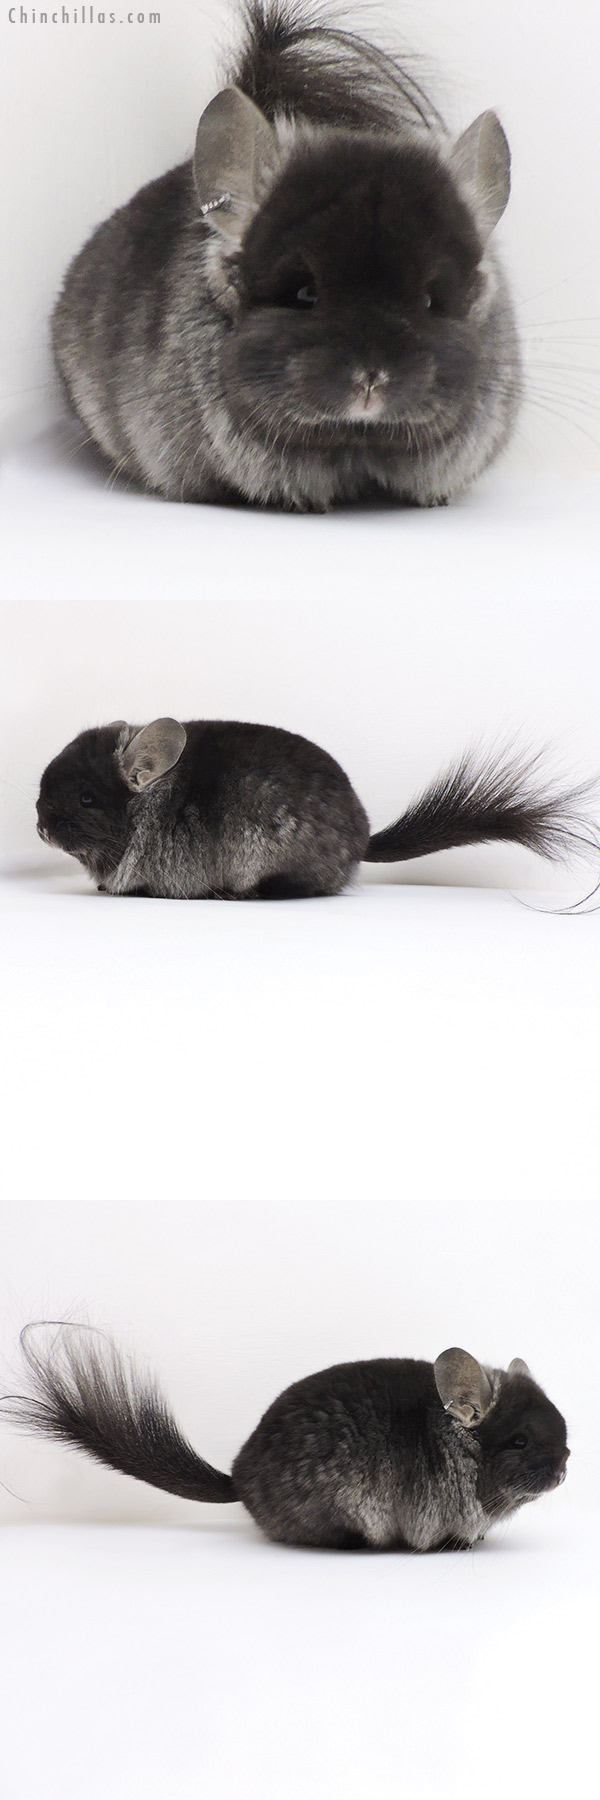 Chinchilla or related item offered for sale or export on Chinchillas.com - 17359 Exceptional Blocky Brevi Type TOV Ebony ( Locken Carrier )  Royal Persian Angora Male Chinchilla